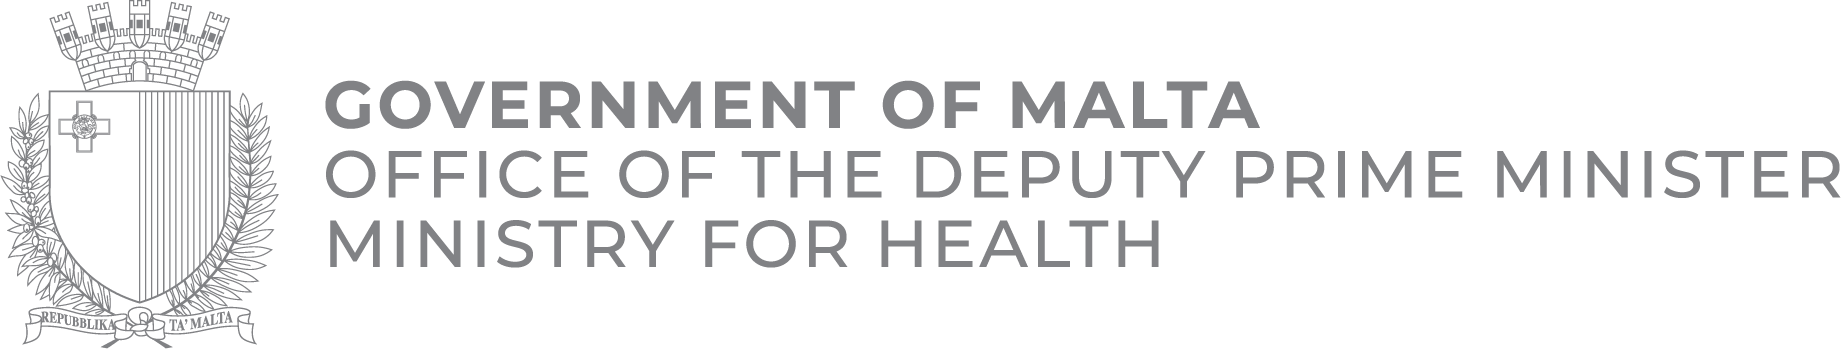 Ministry for Health (MFH)